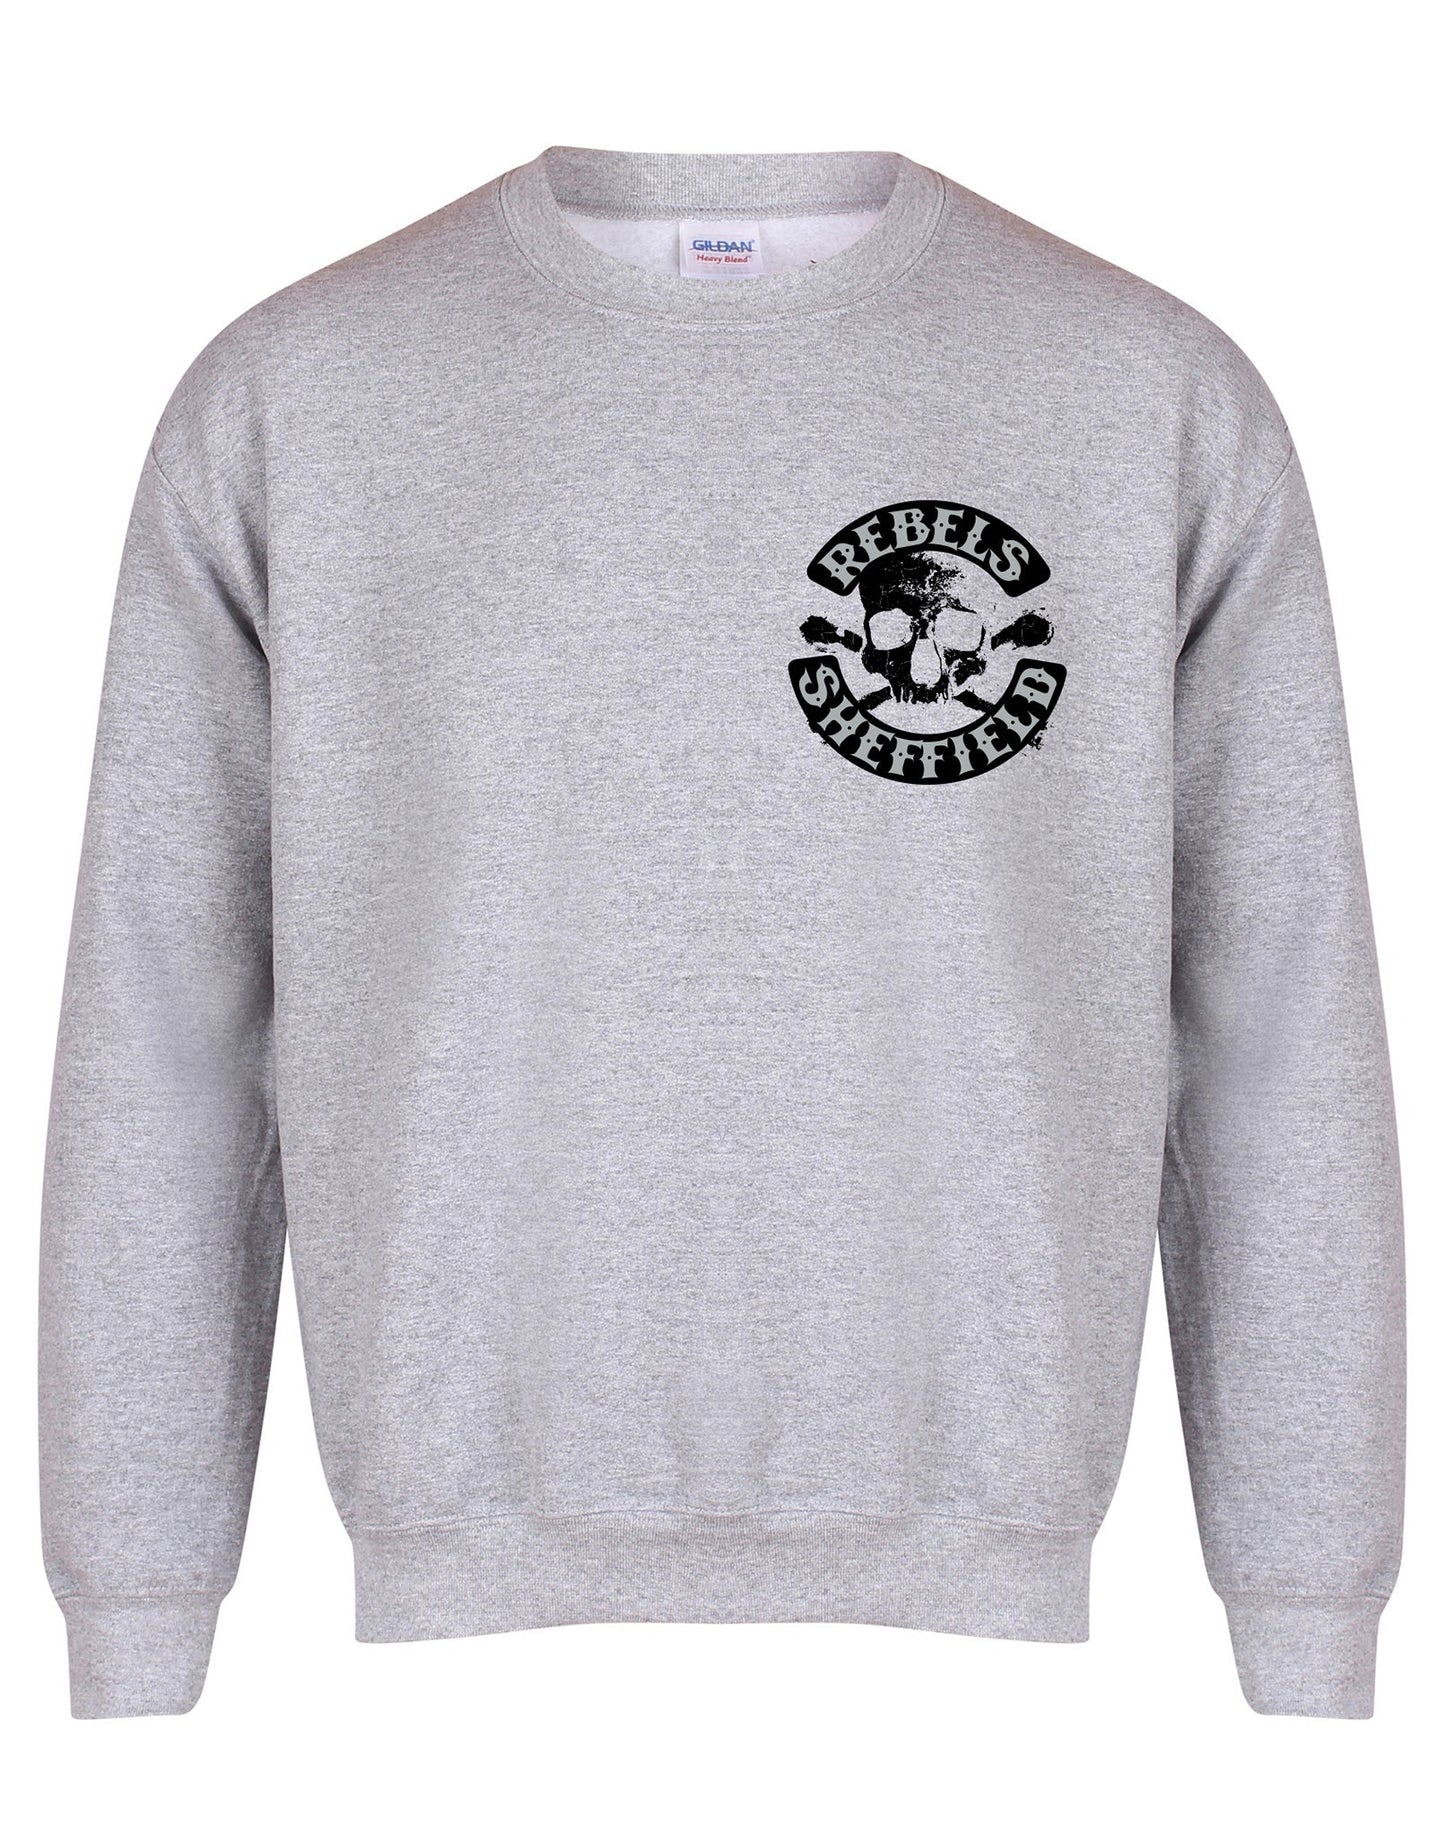 Rebels small skull unisex fit sweatshirt - various colours - Dirty Stop Outs